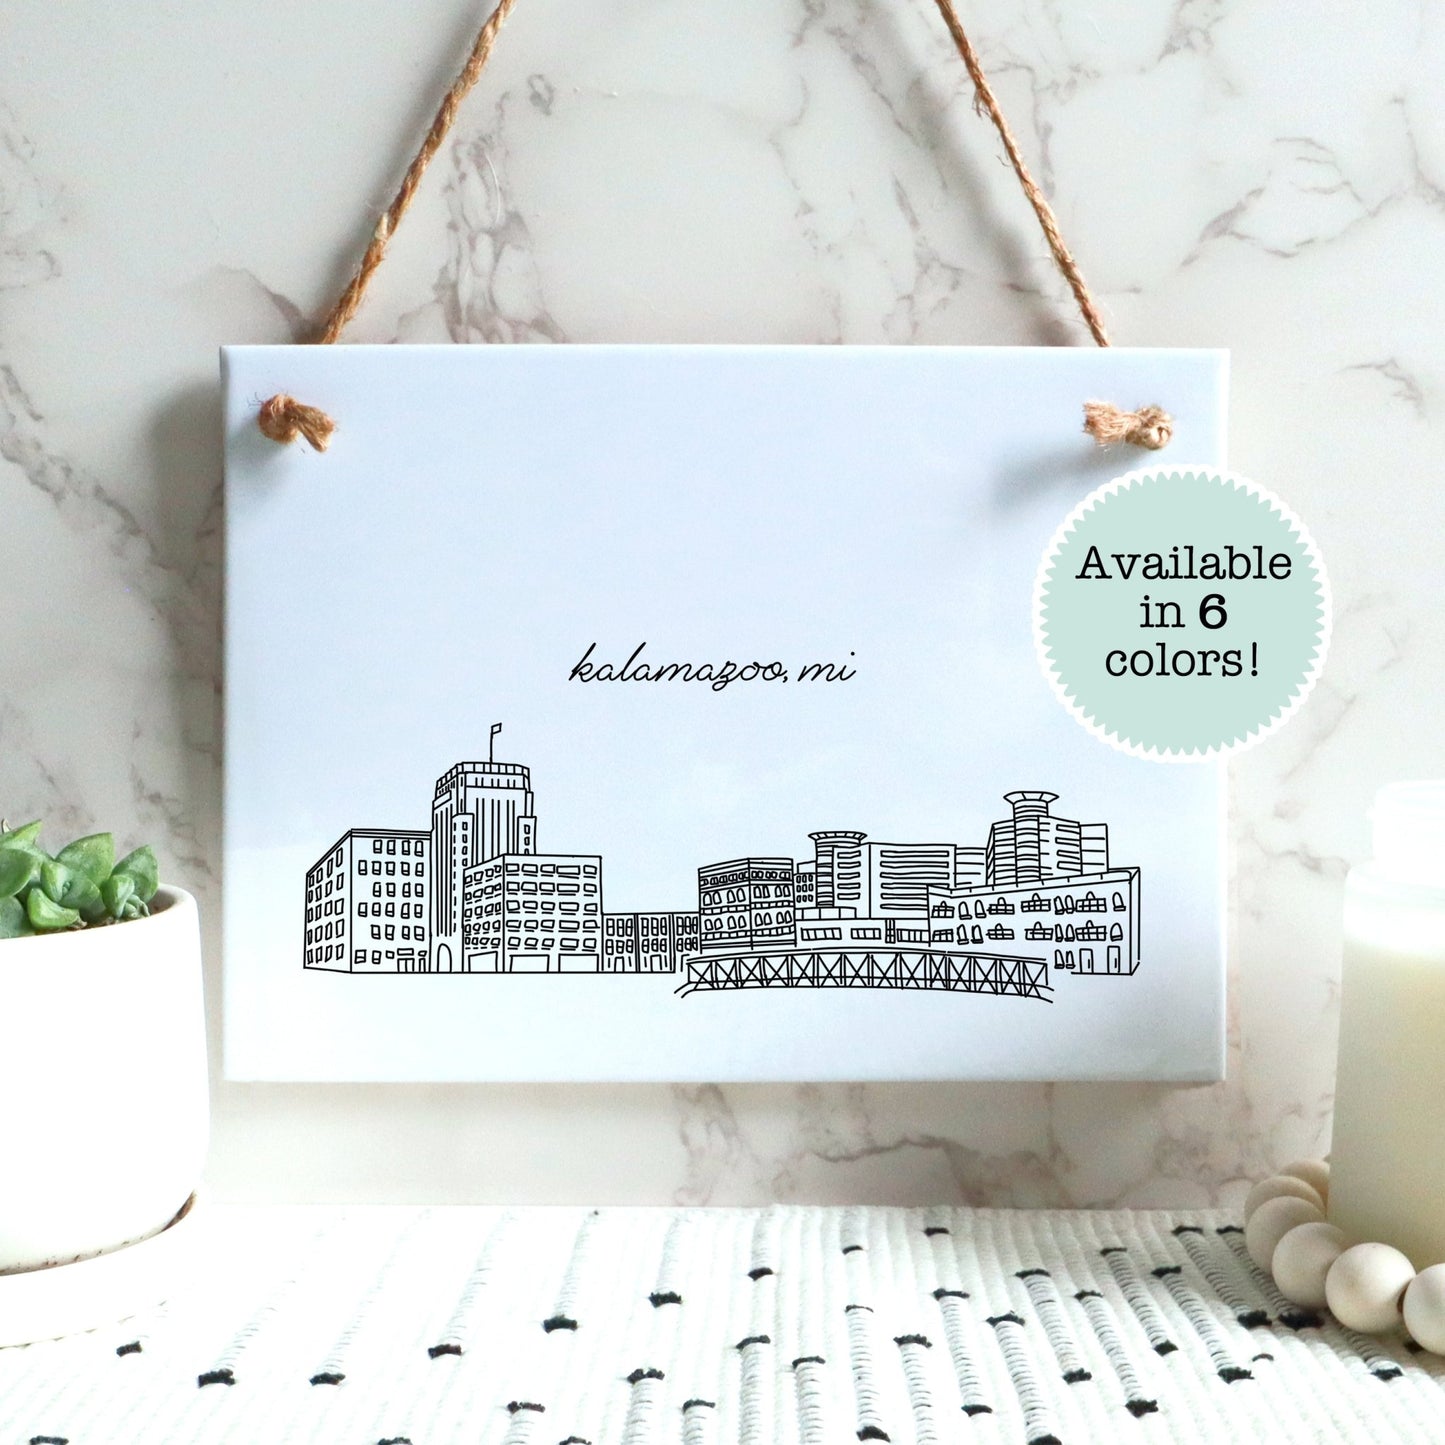 A Kalamazoo MI souvenir of a drawing of the city skyline on a rectangle tile sign, hanging on a wall - in black and white